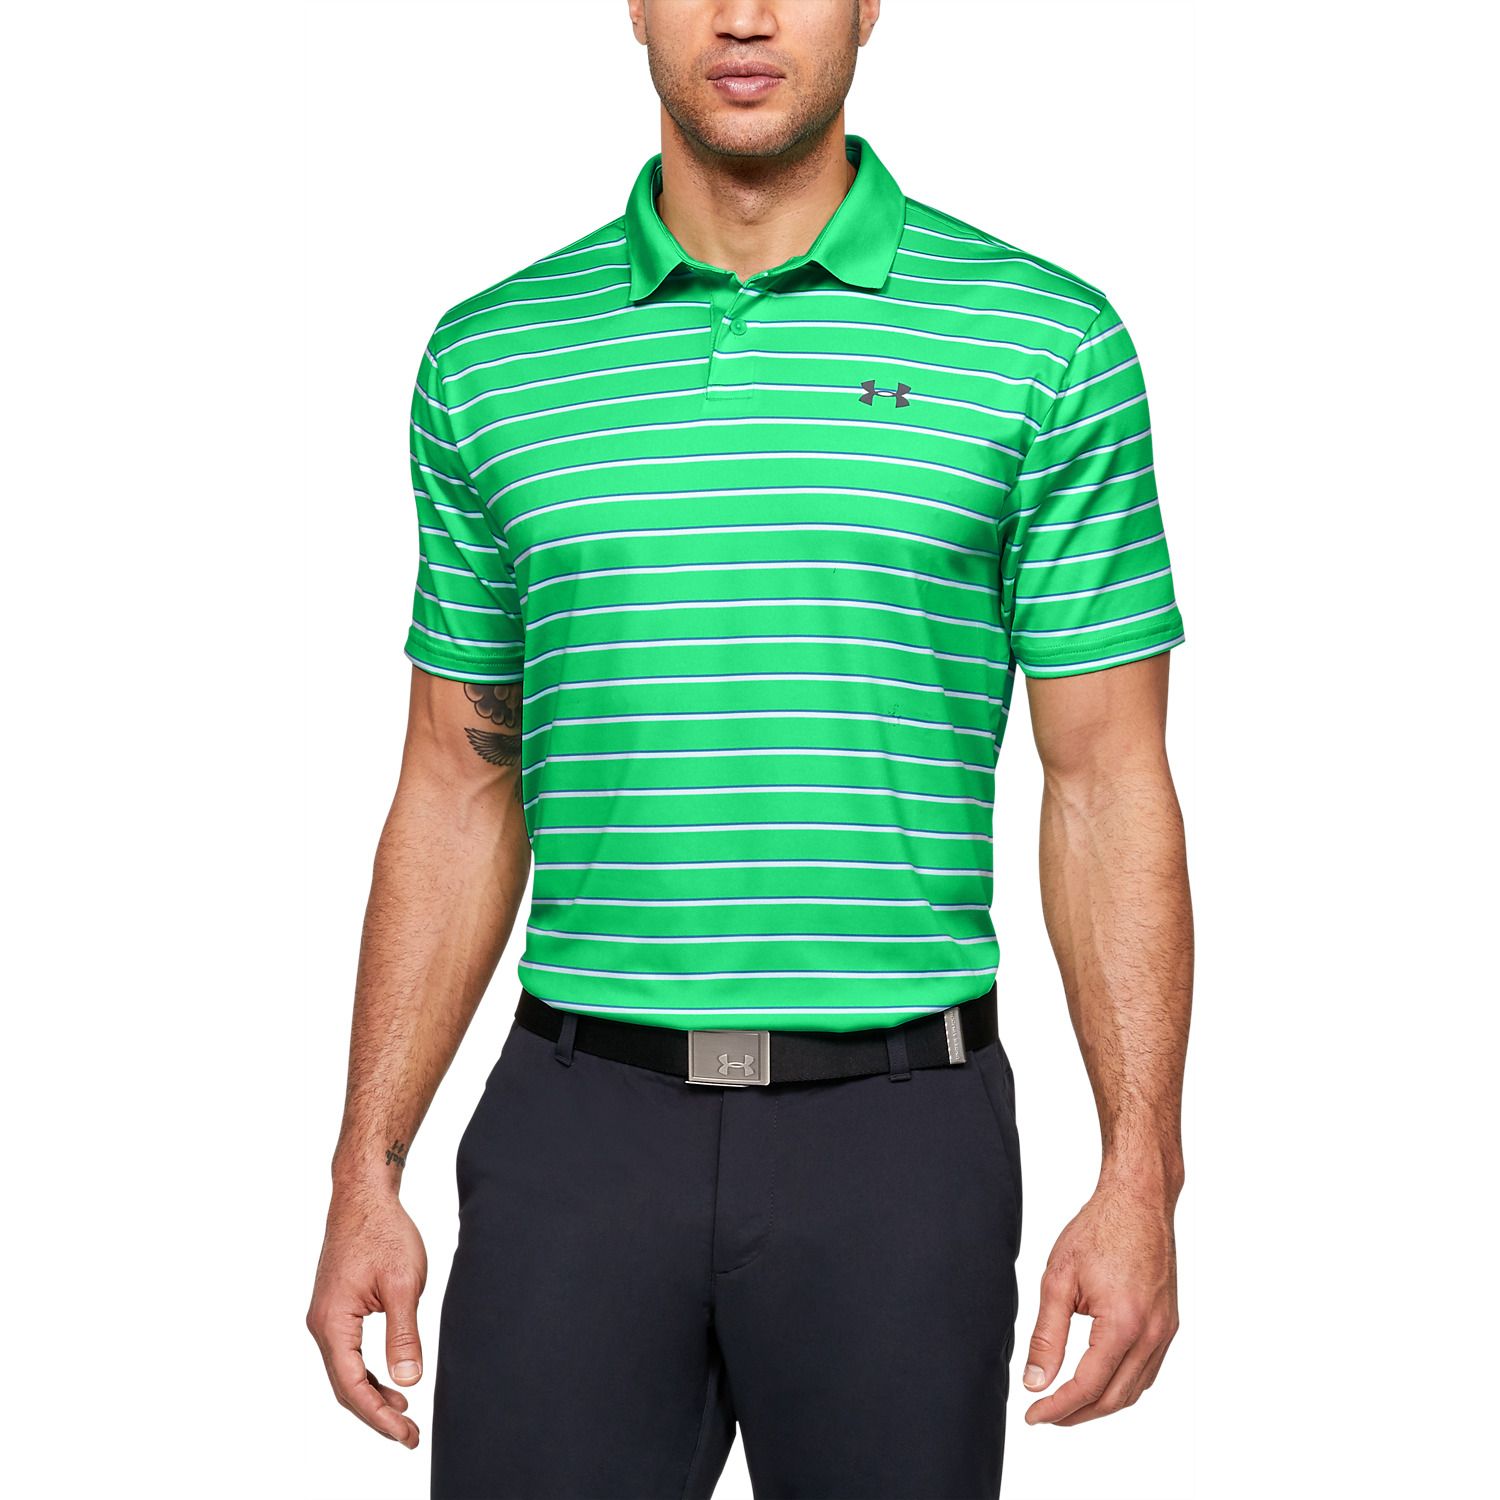 men's under armour striped performance 2.0 golf polo